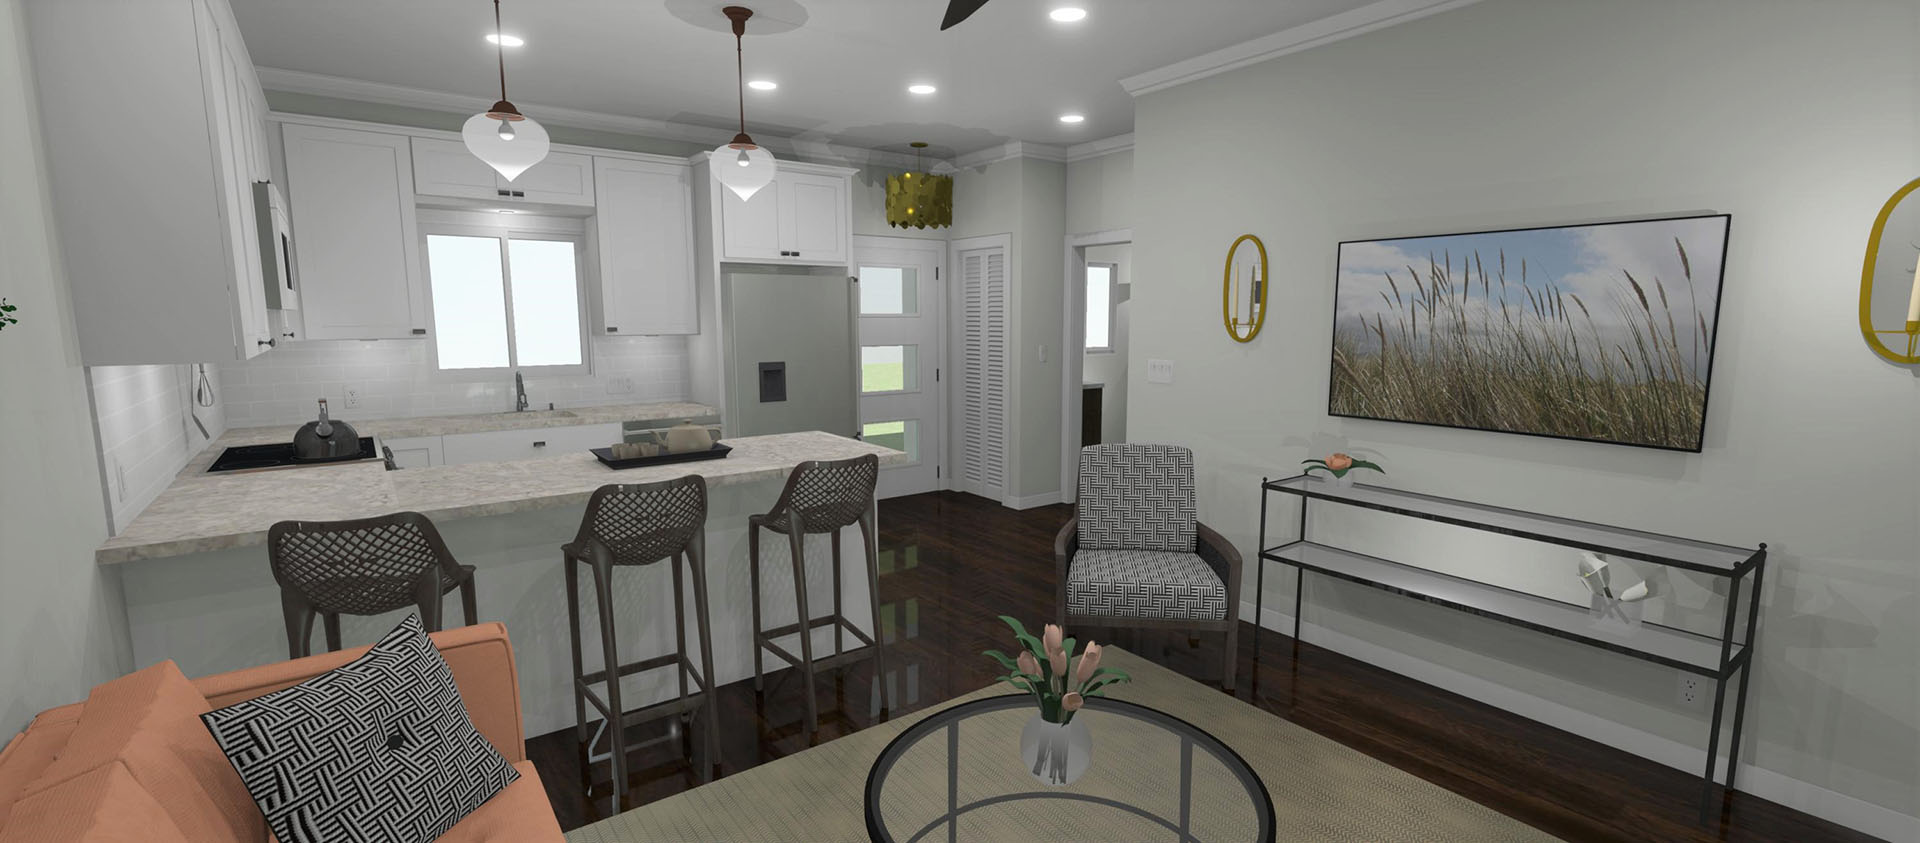 Kitchen with white cabinets, white marble counter, and a small living room